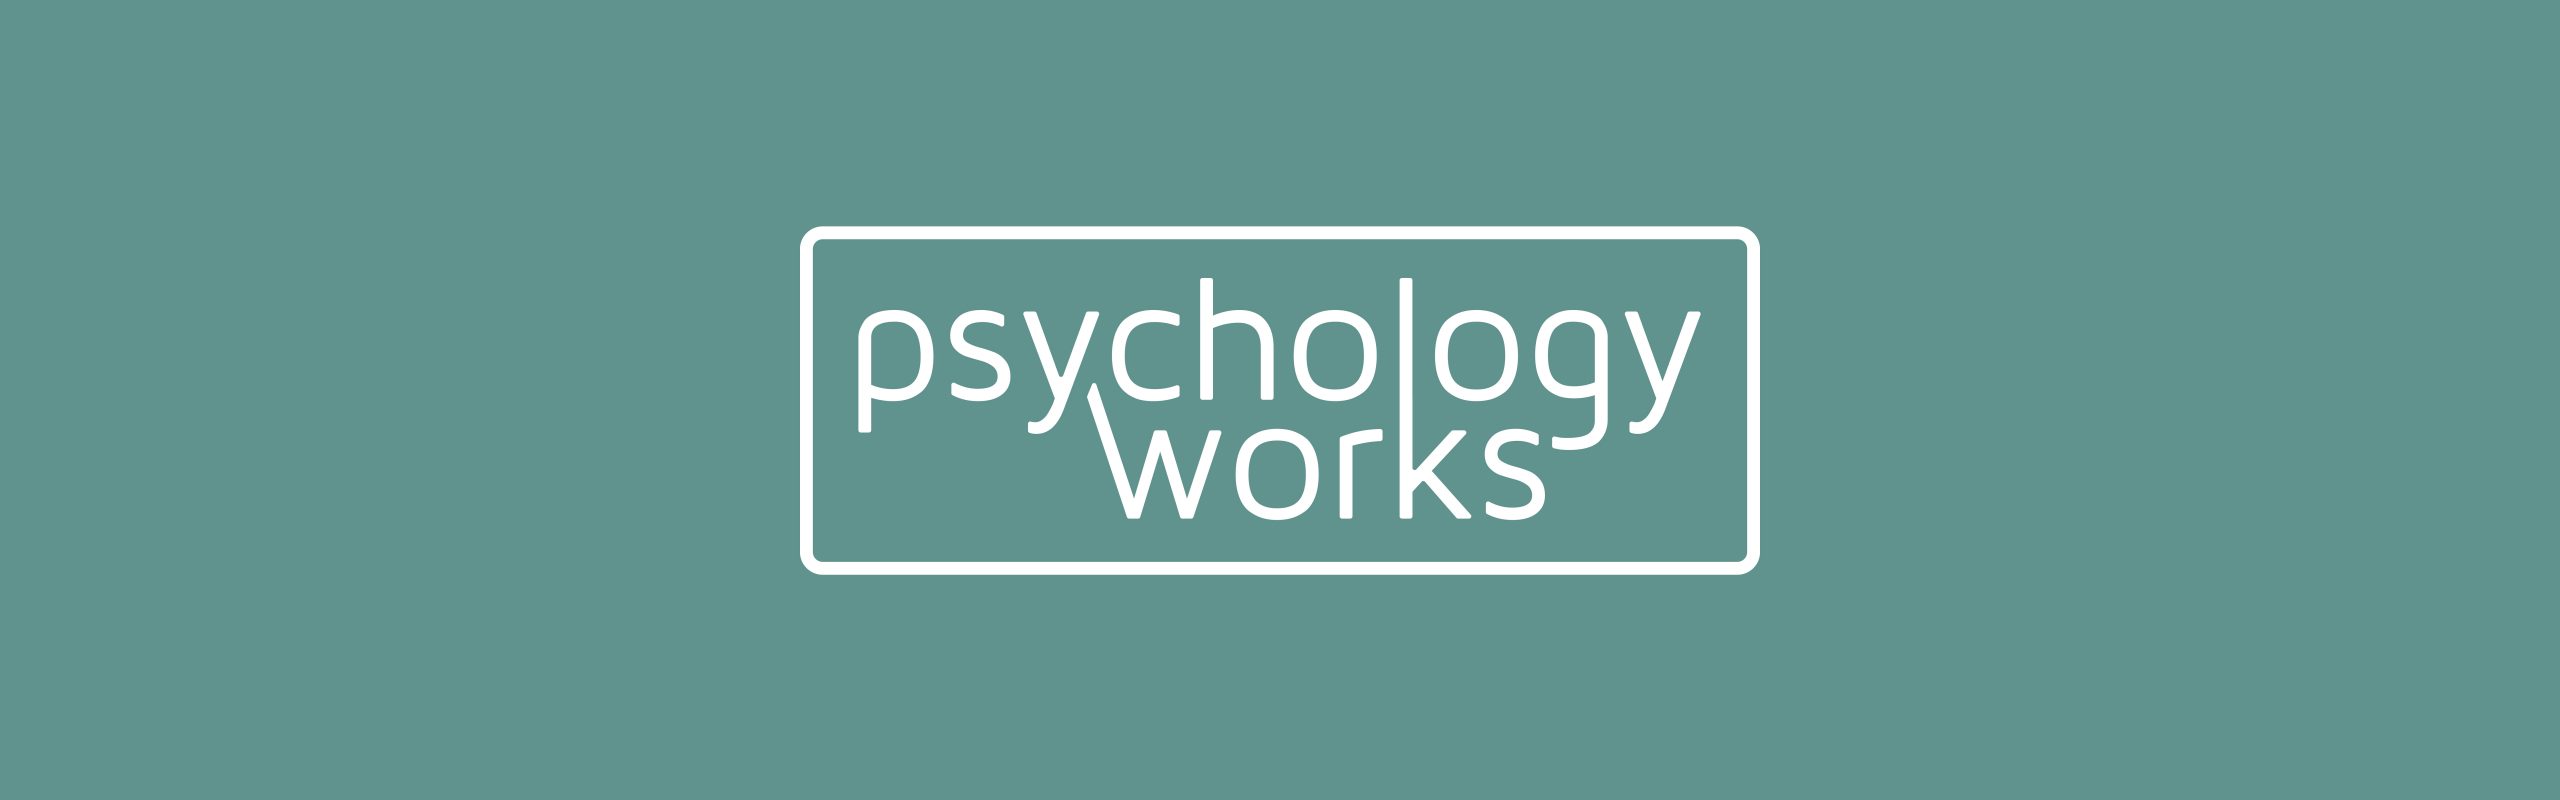 A logo with the words "psychology works" in white text against a teal background, enclosed within a white rectangular border.